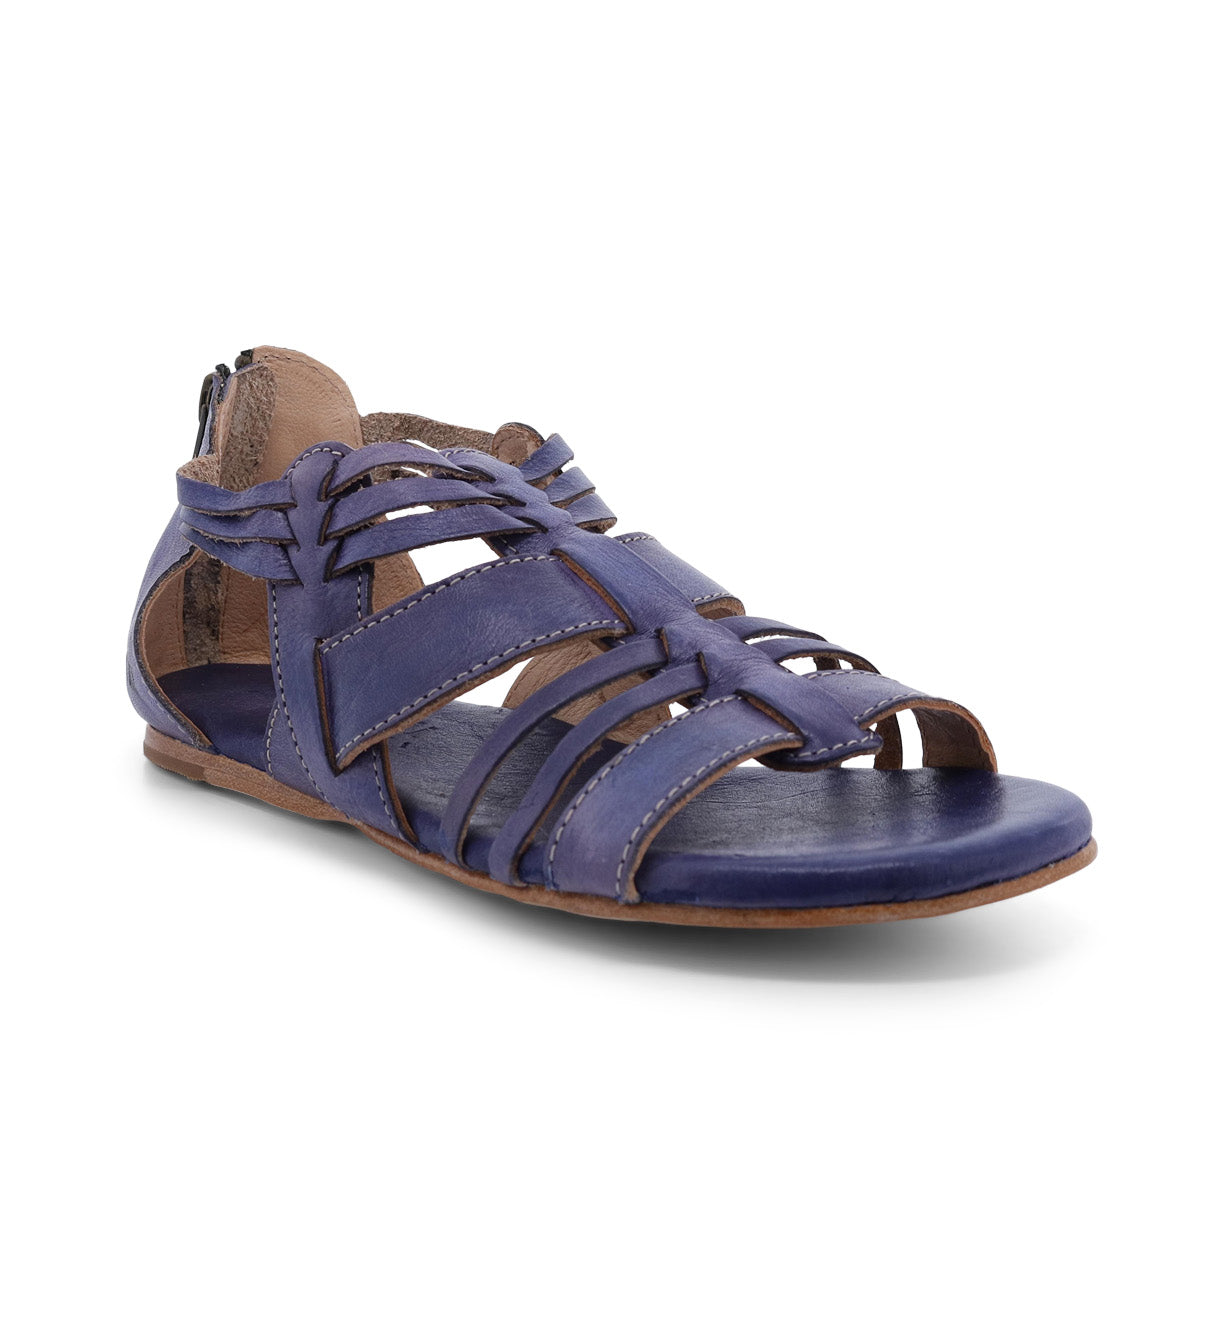 Bed Stu Women's blue Cara gladiator sandals with straps.